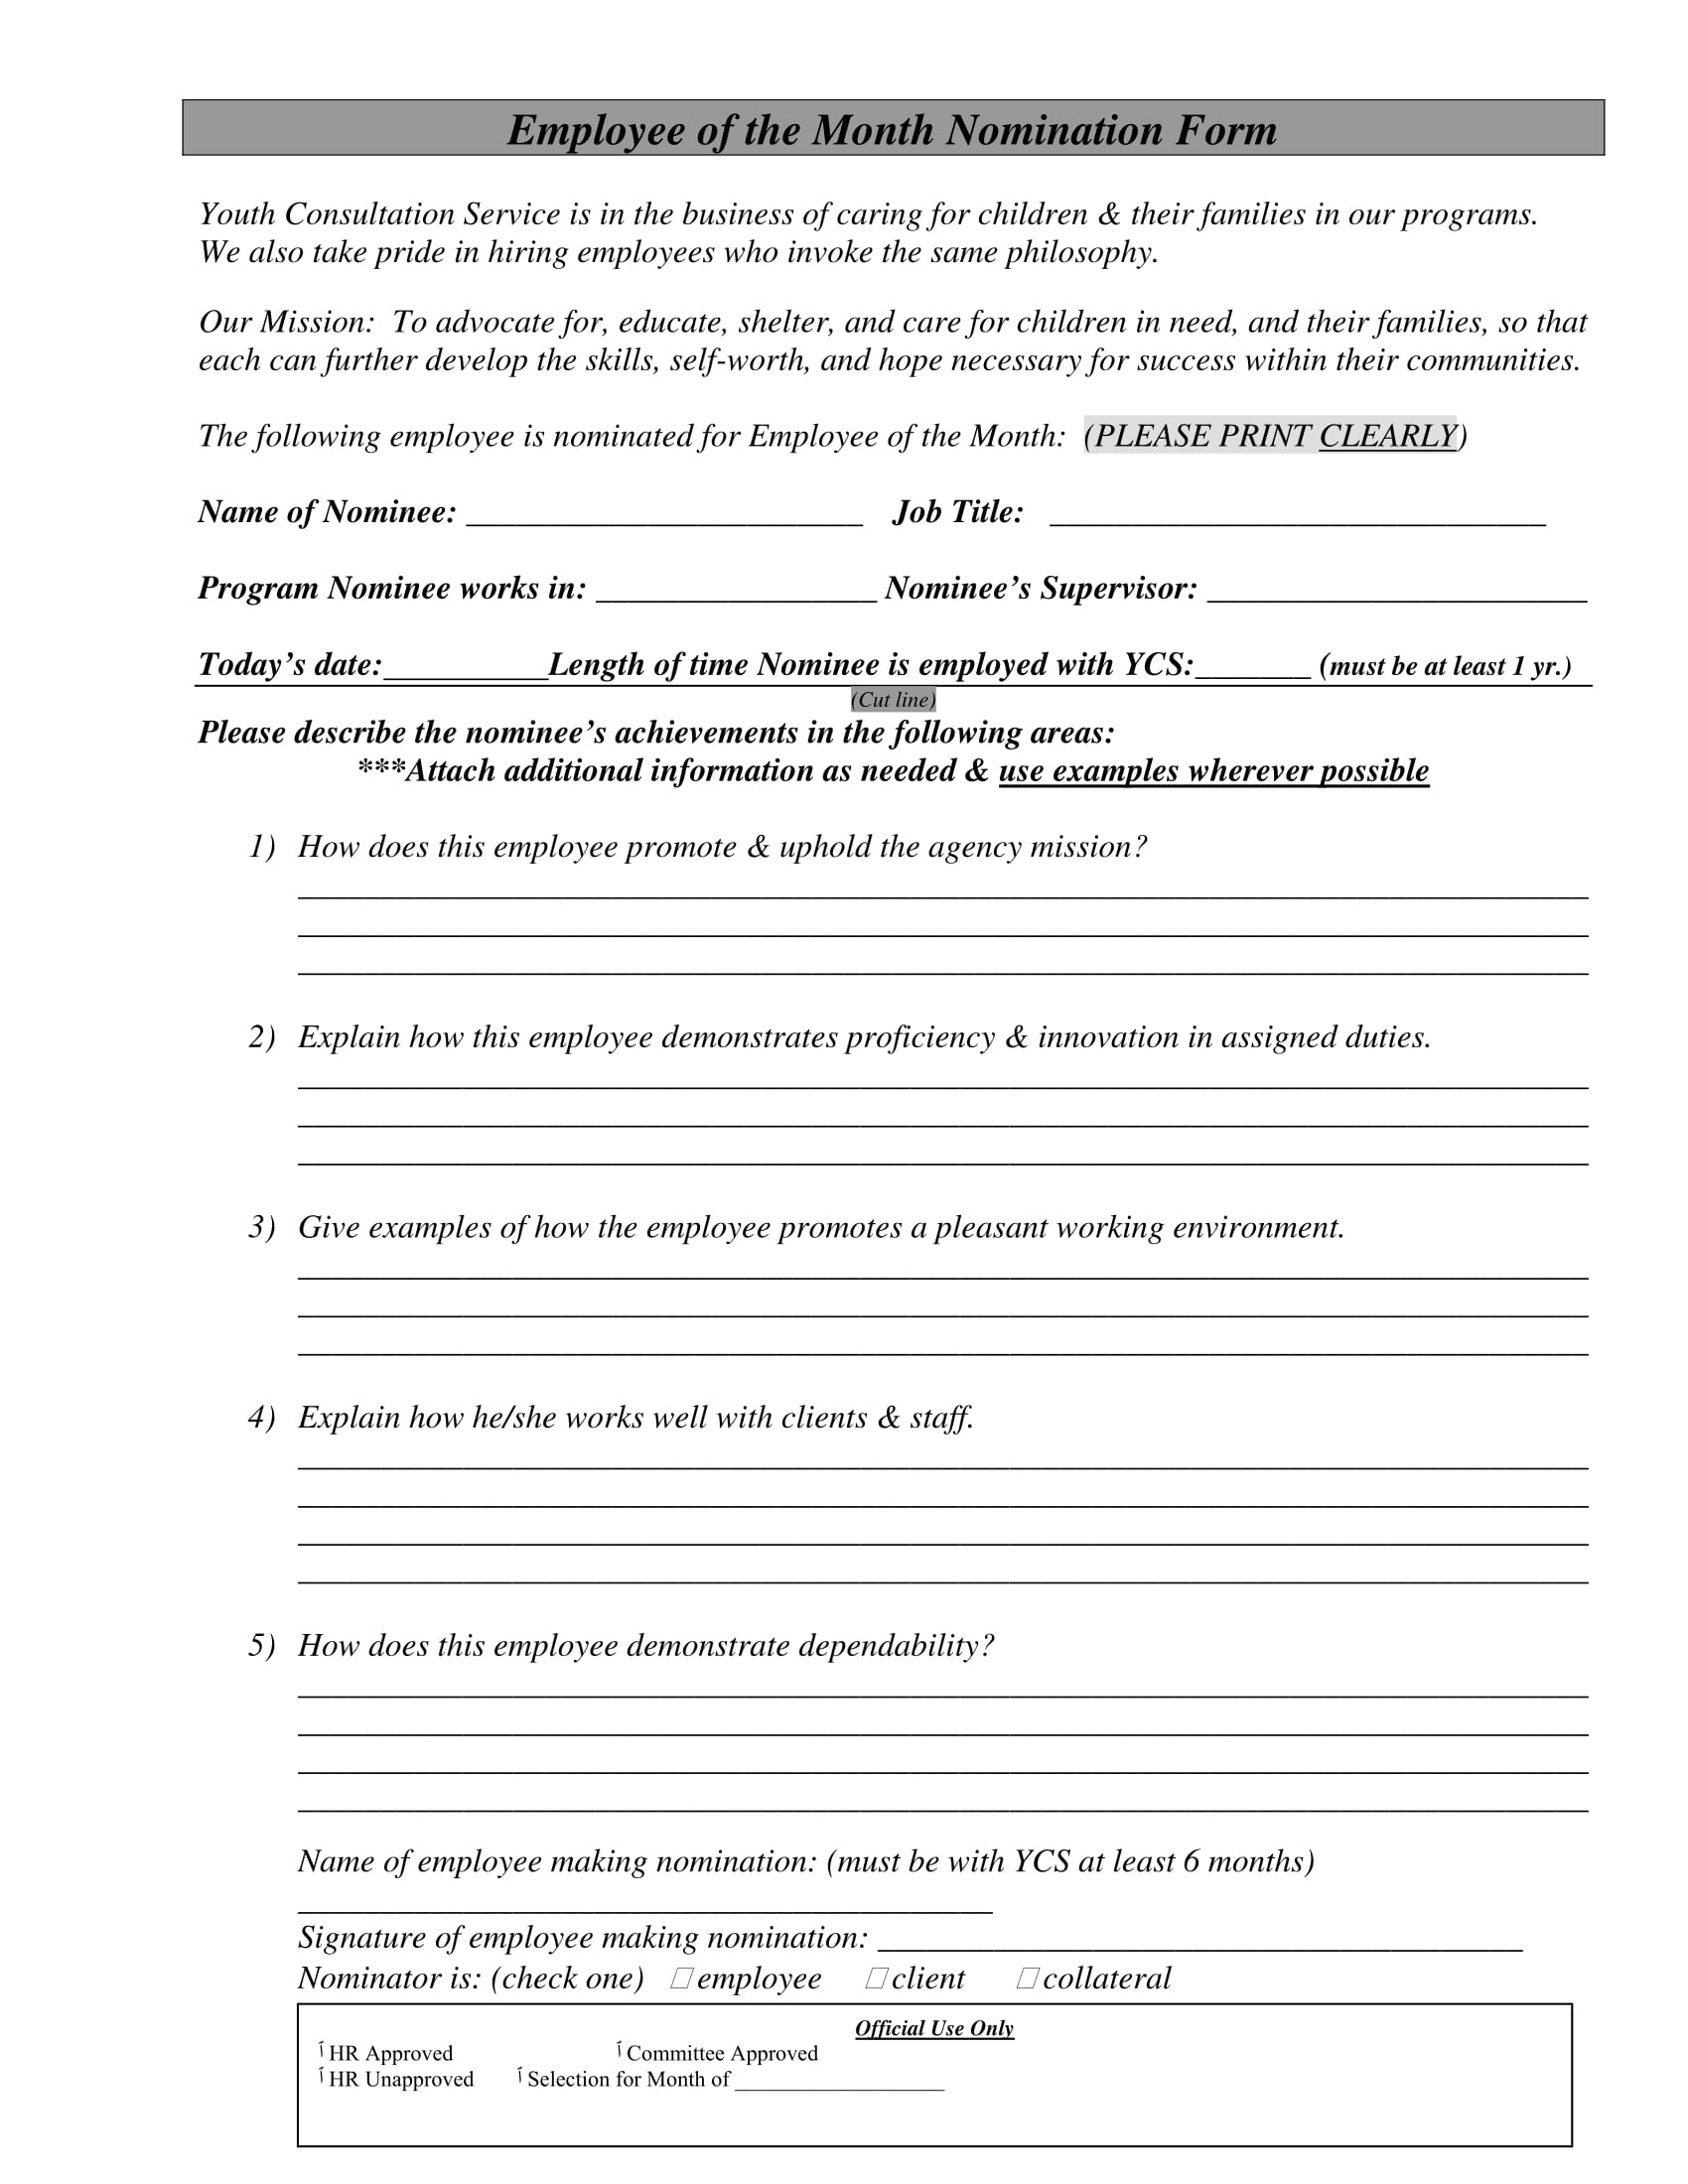 employee of the month nomination or voting form 3